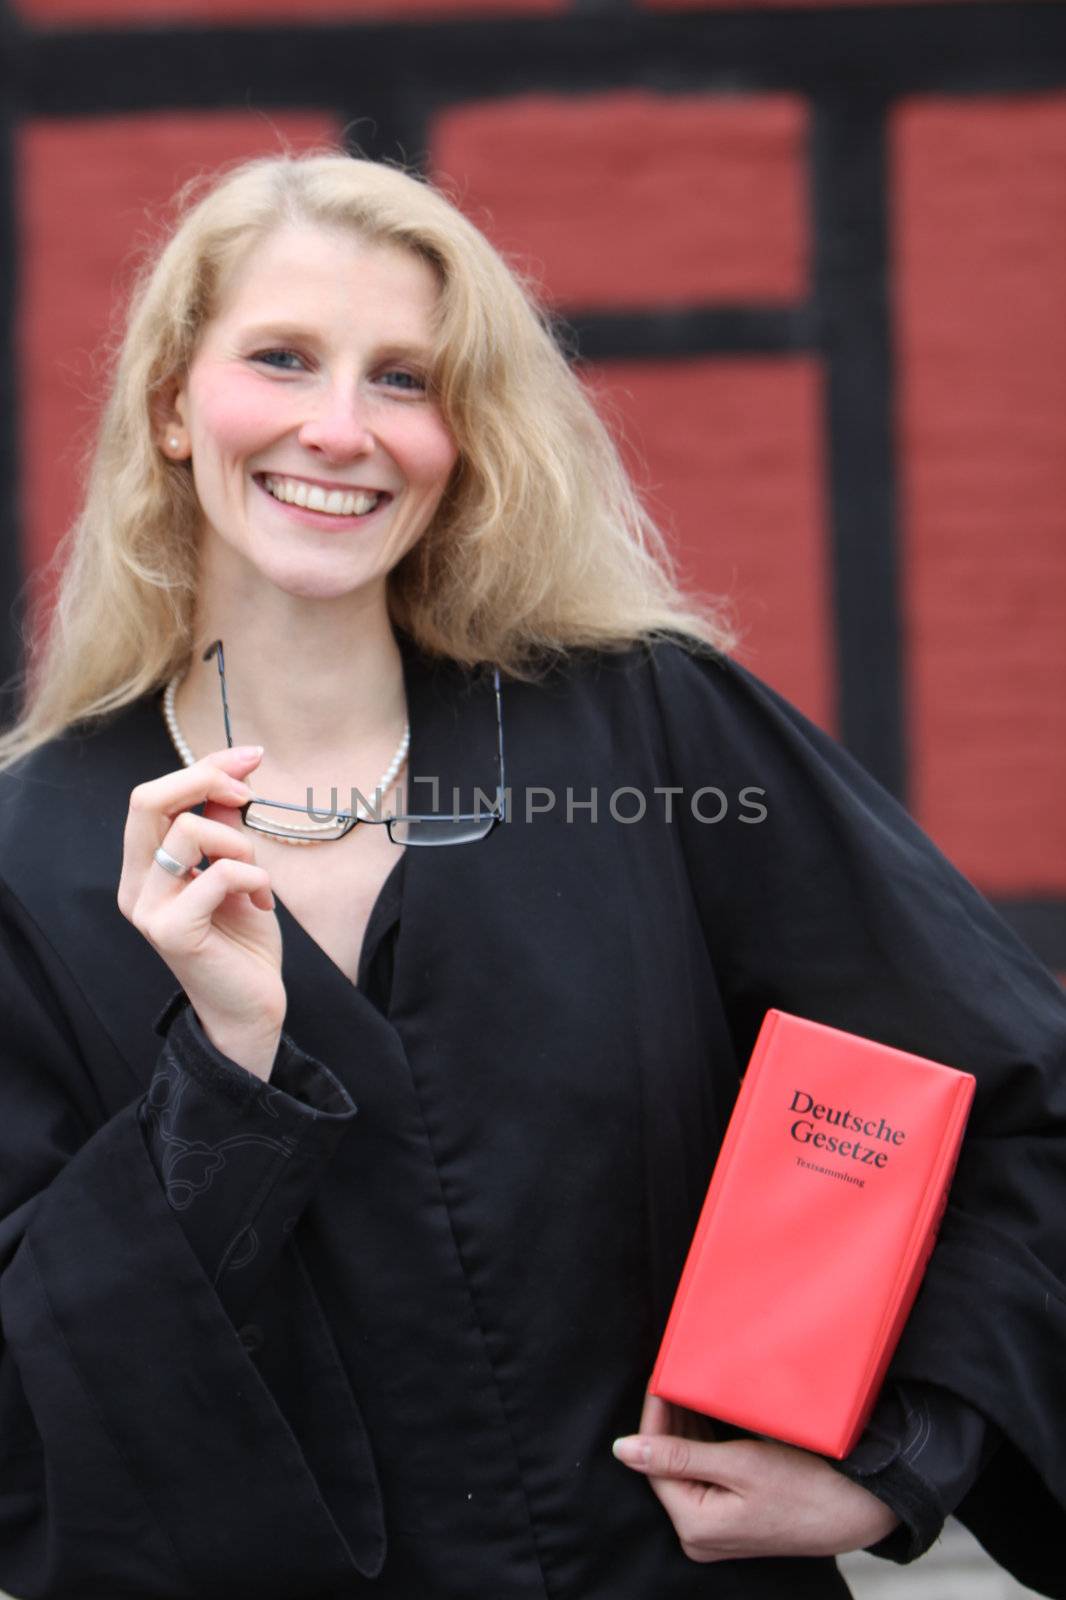 Friendly smiling law student or lawyer with red law book under his arm and glasses in hand
